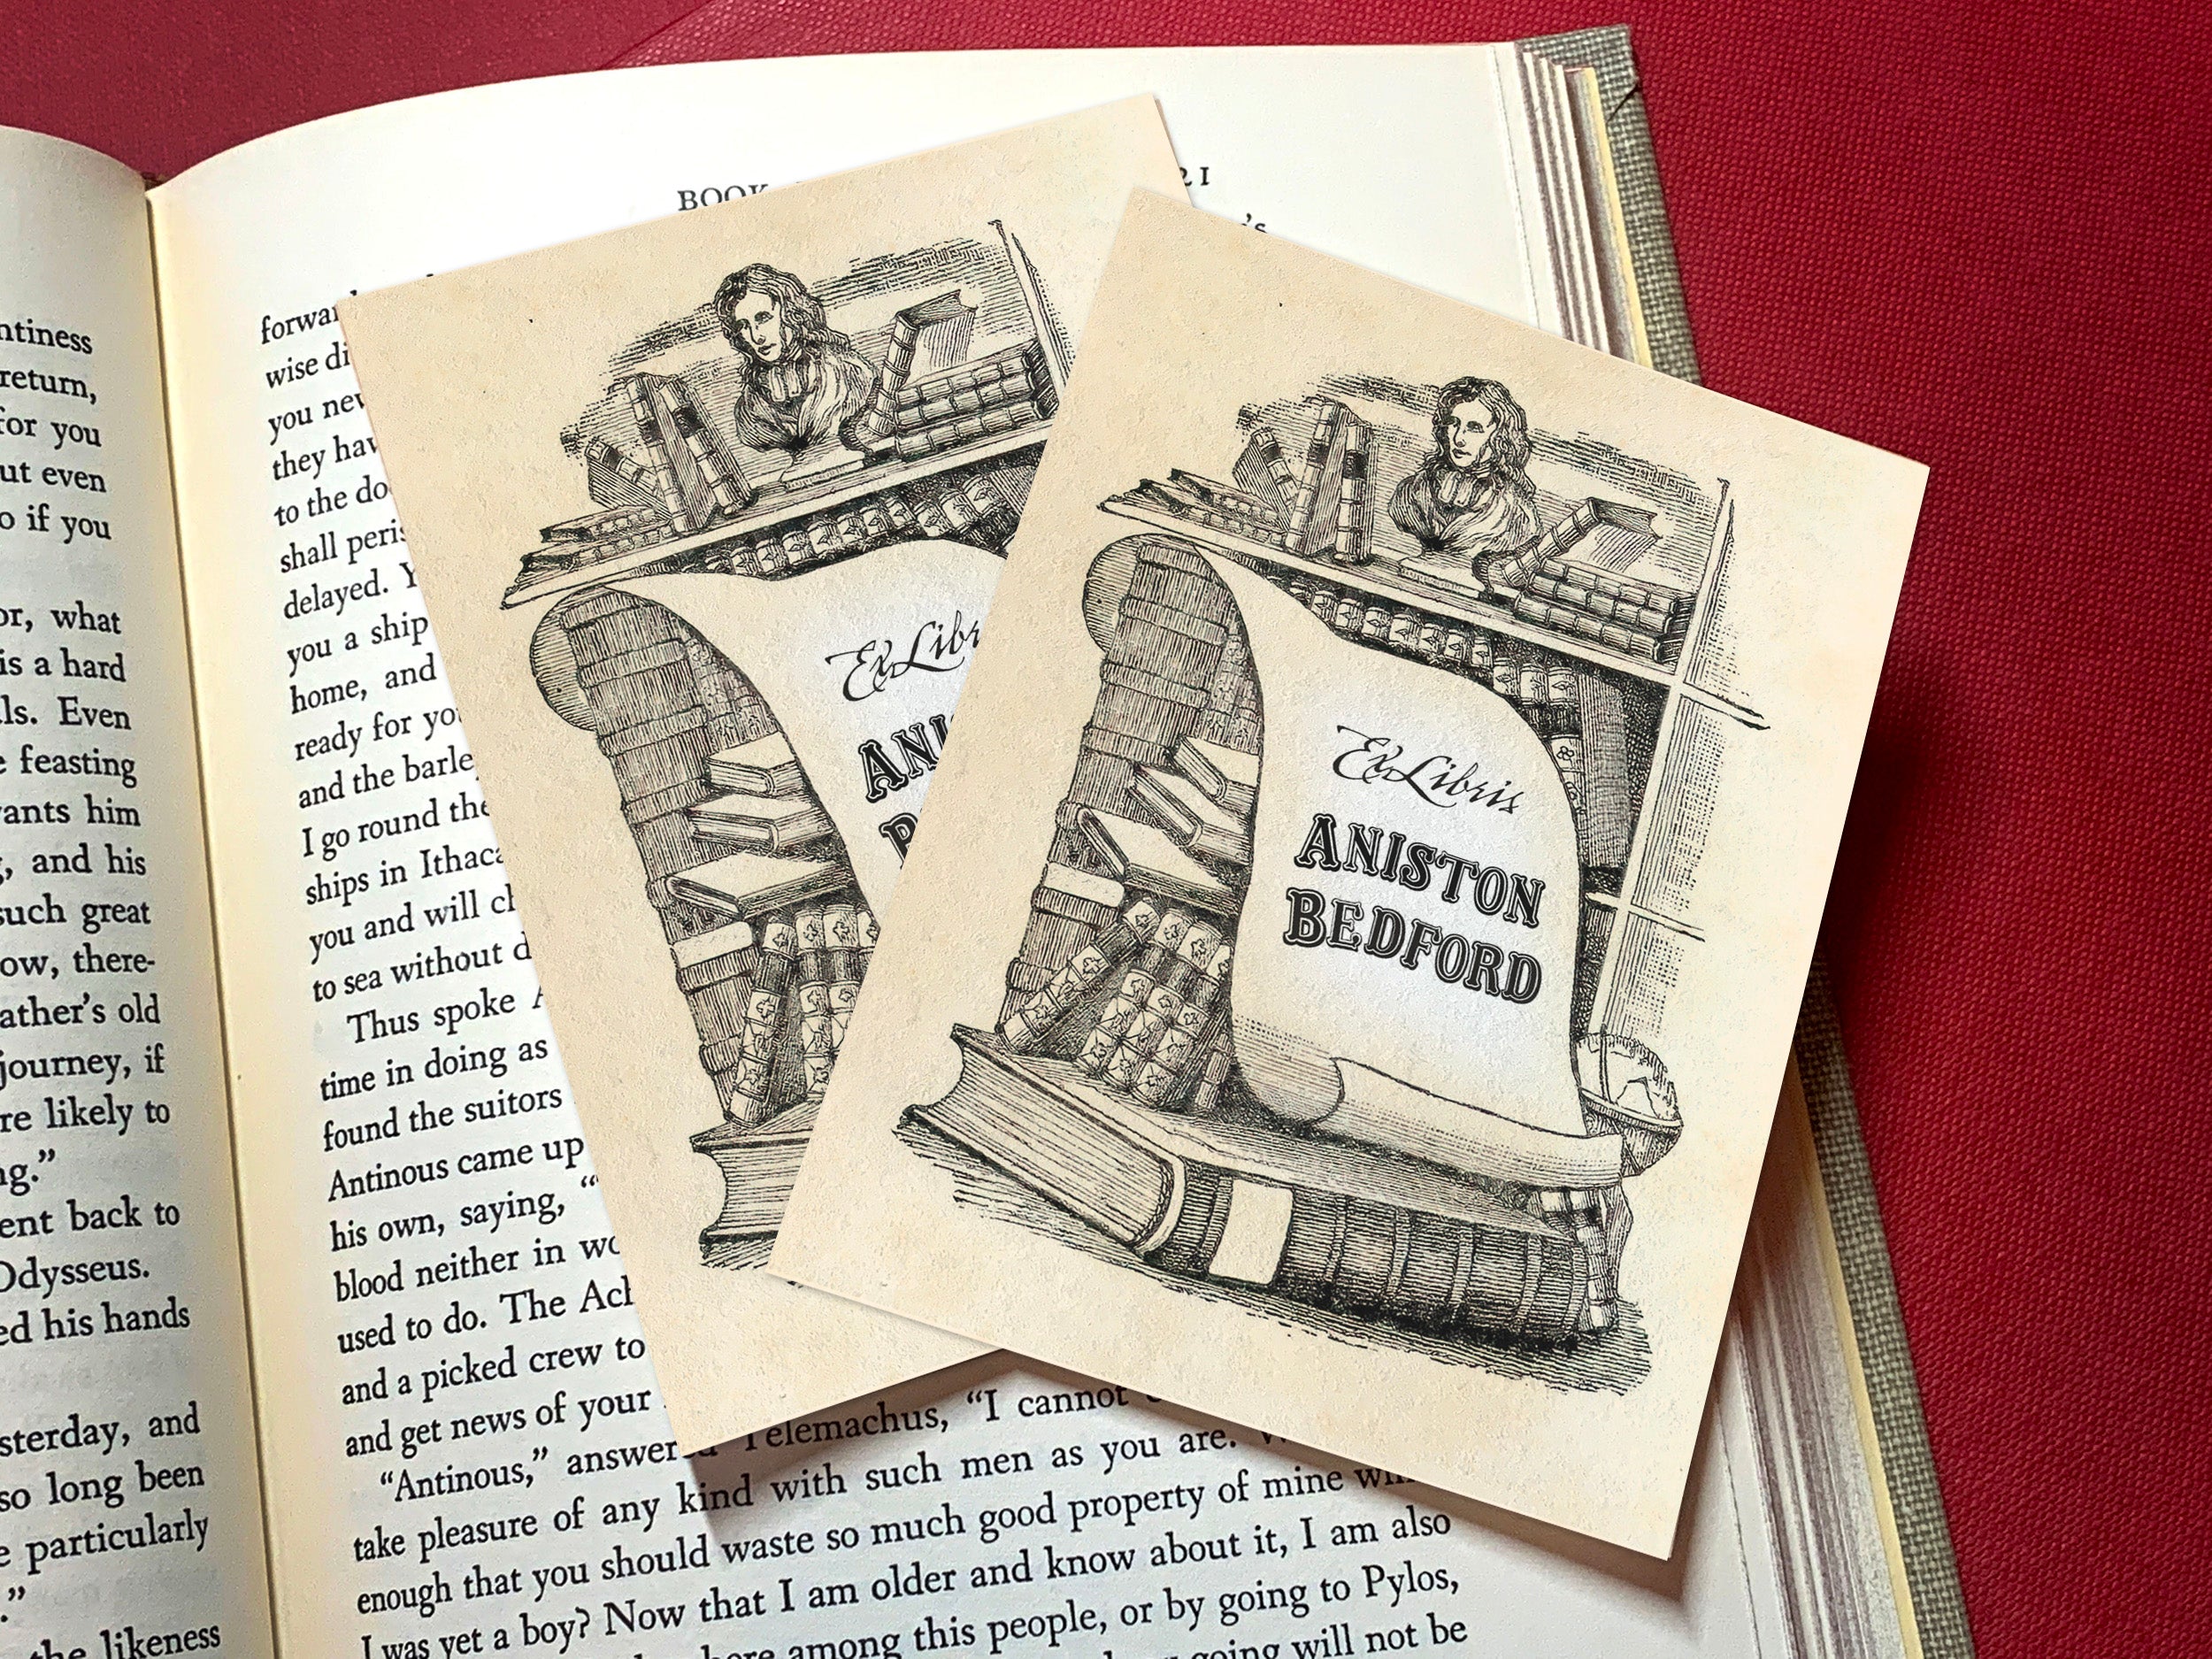 Shelf with Bust and Scroll, Personalized Gothic Ex-Libris Bookplates, Crafted on Traditional Gummed Paper, 3in x 4in, Set of 30